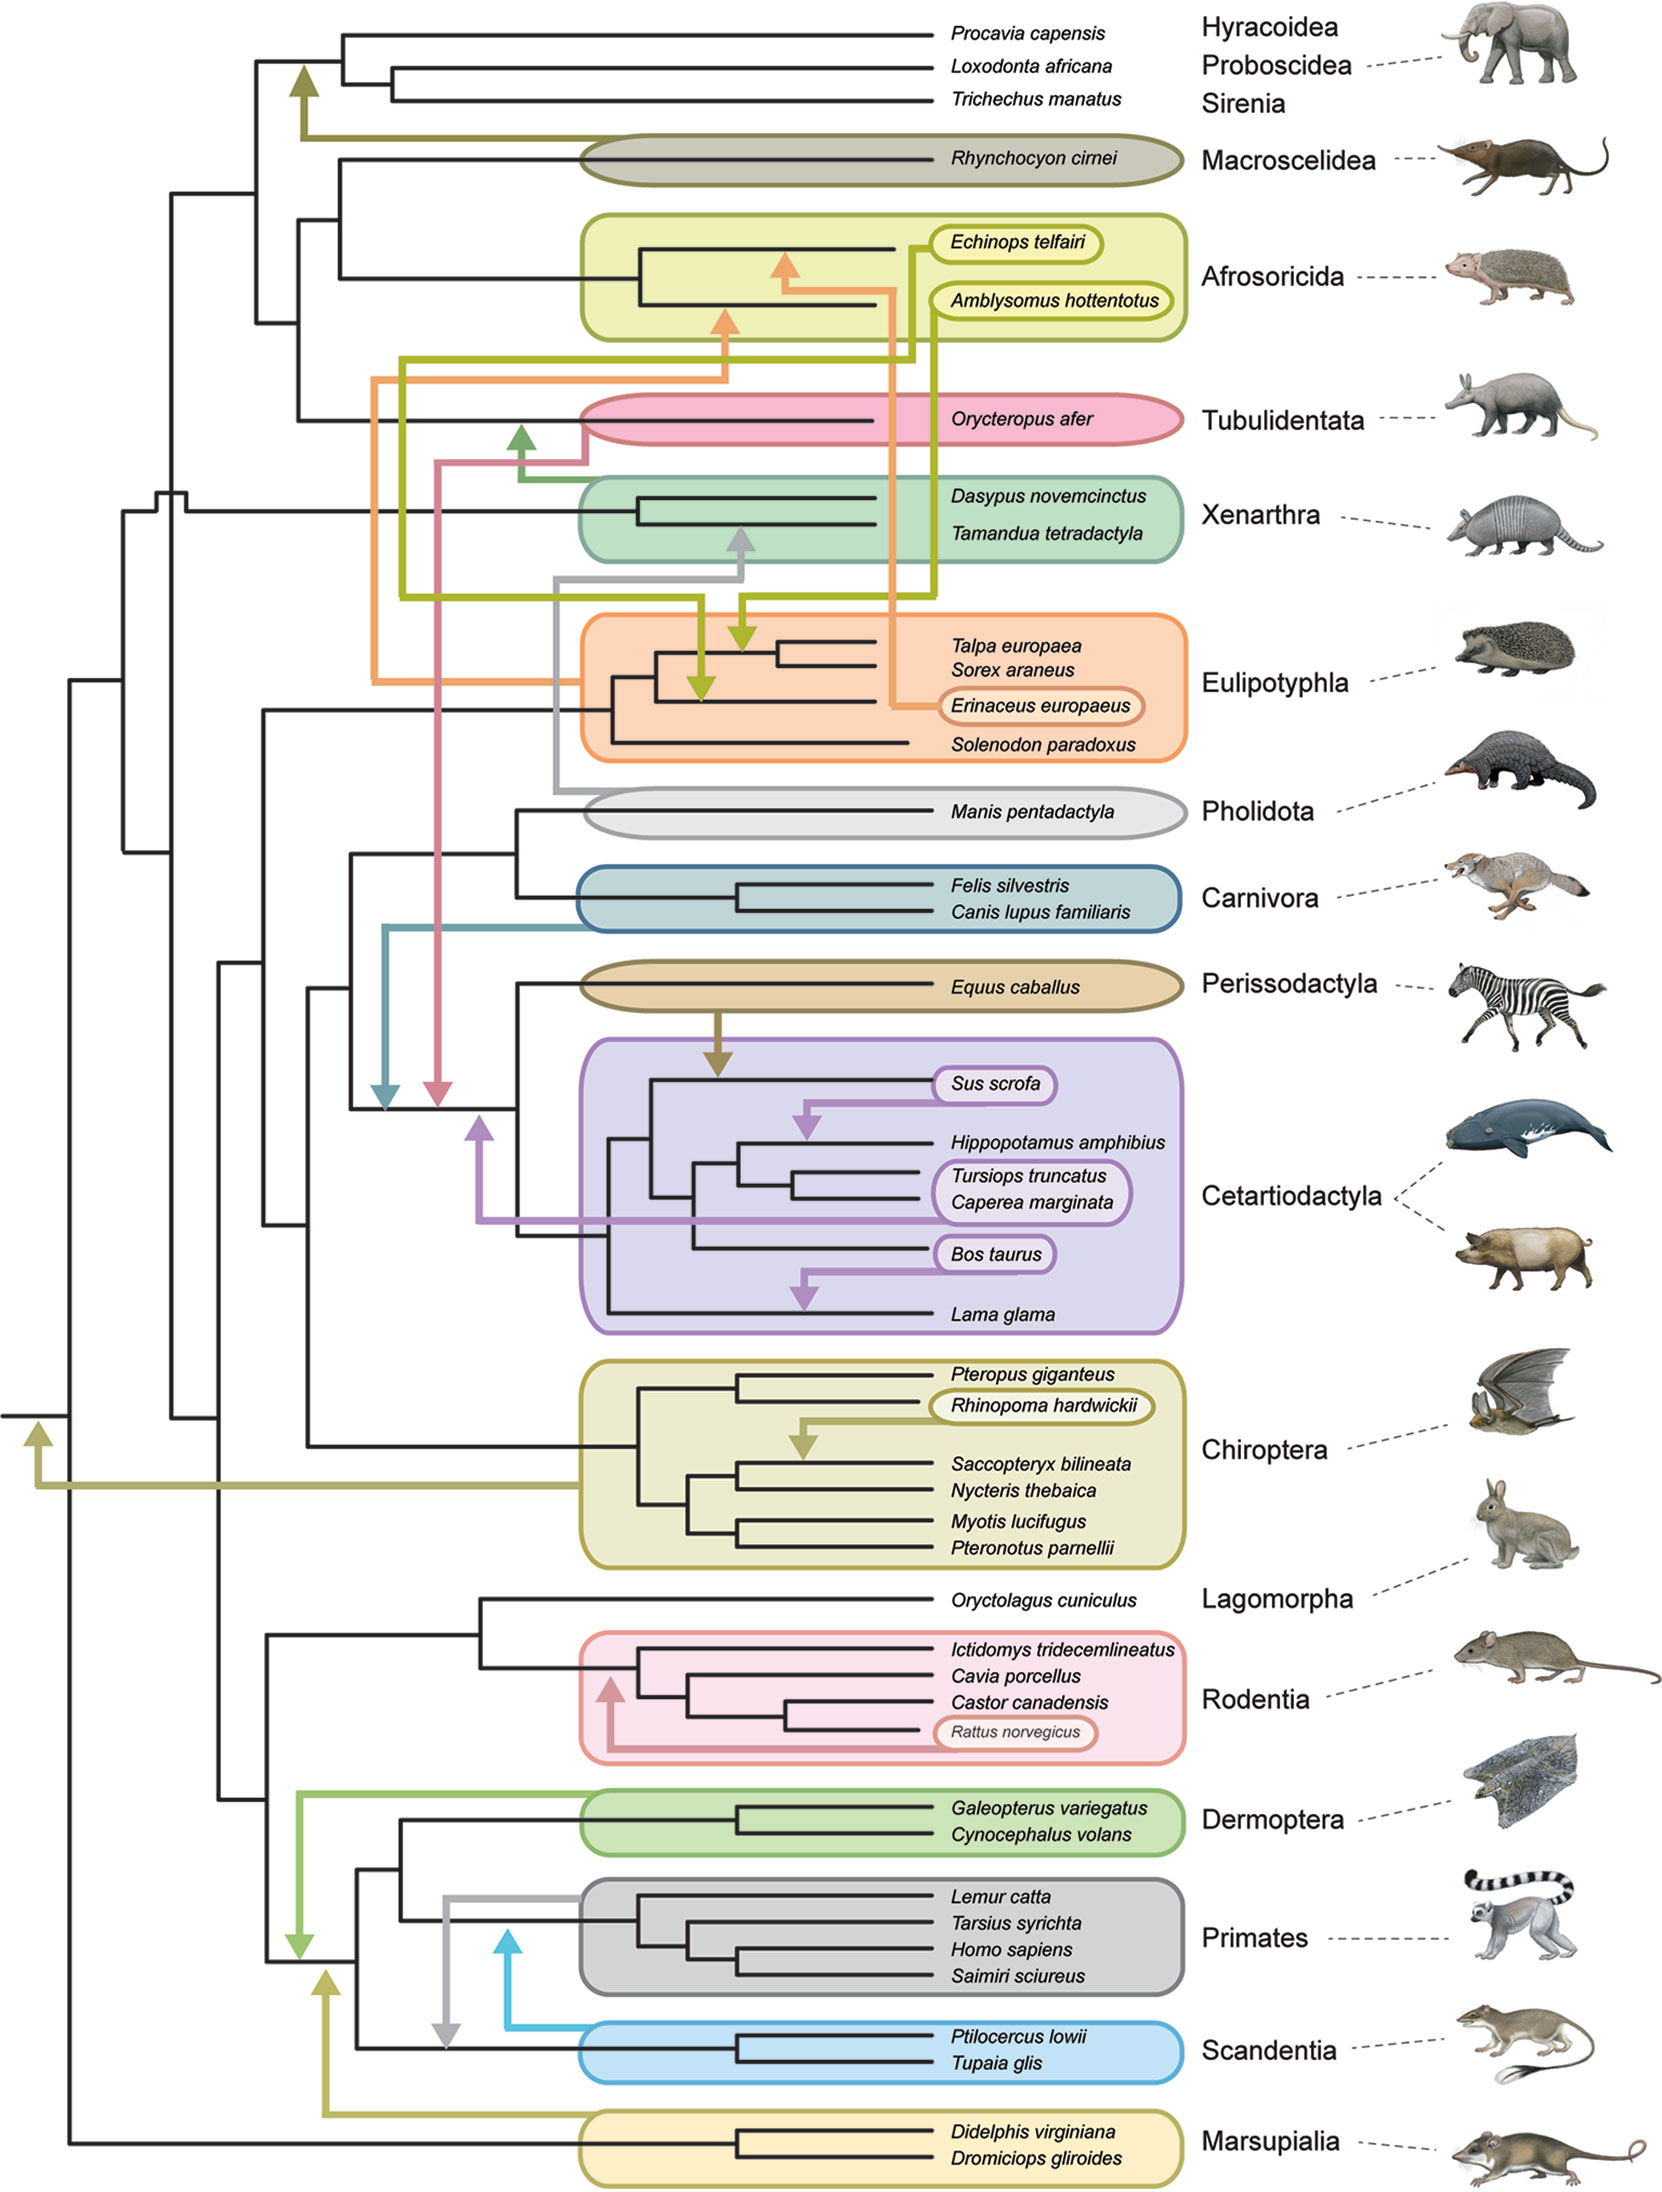 Phylogeny of mammaliaforms (simplified after ref. 18) mapping